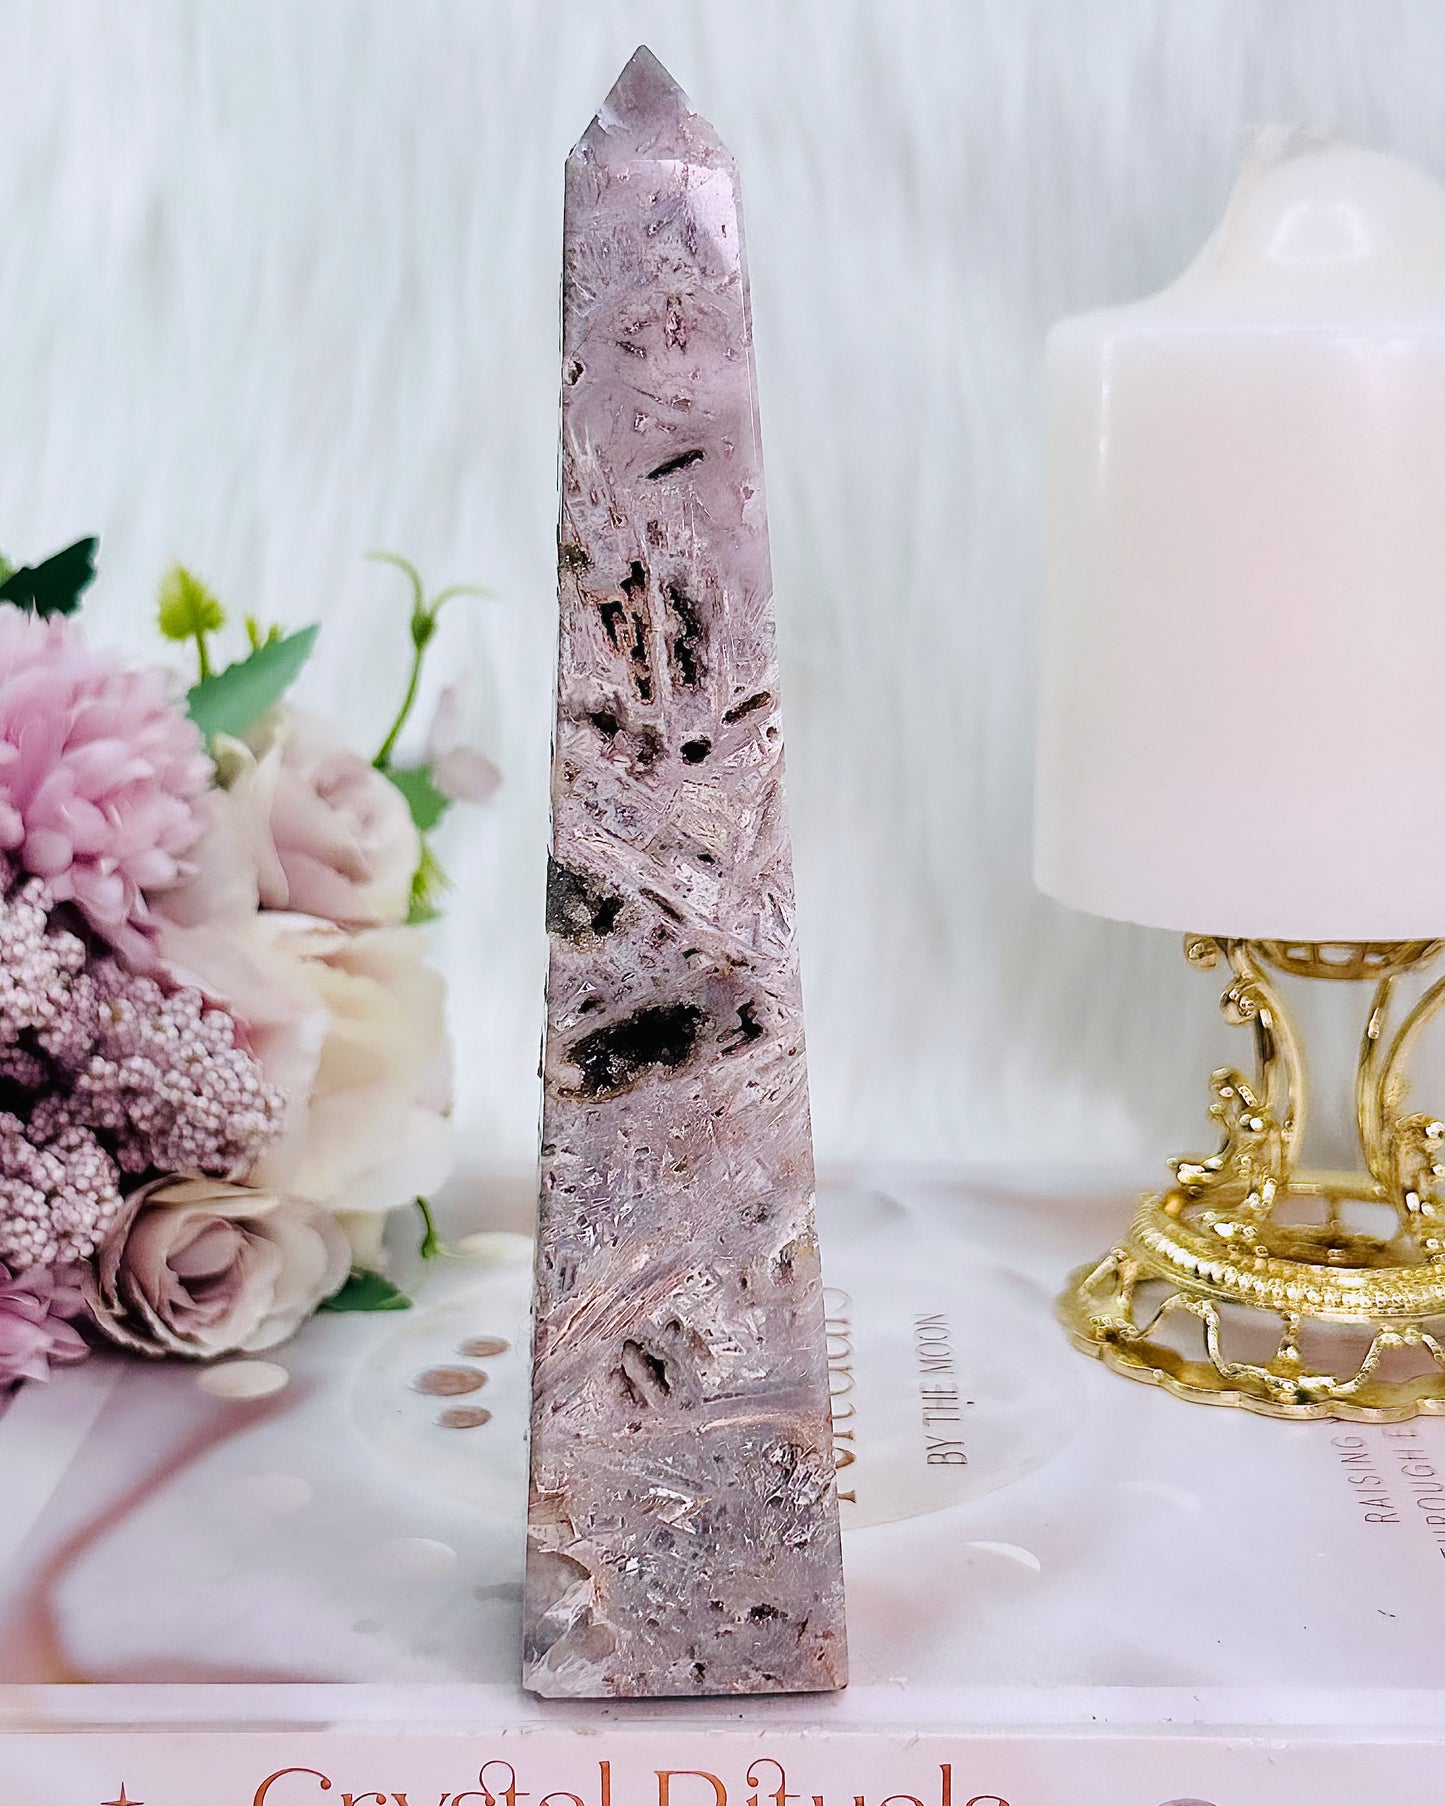 Absolutely Gorgeous Pink Amethyst Druzy Tower | Obelisk 17cm Tall with Rutile Formations From Brazil